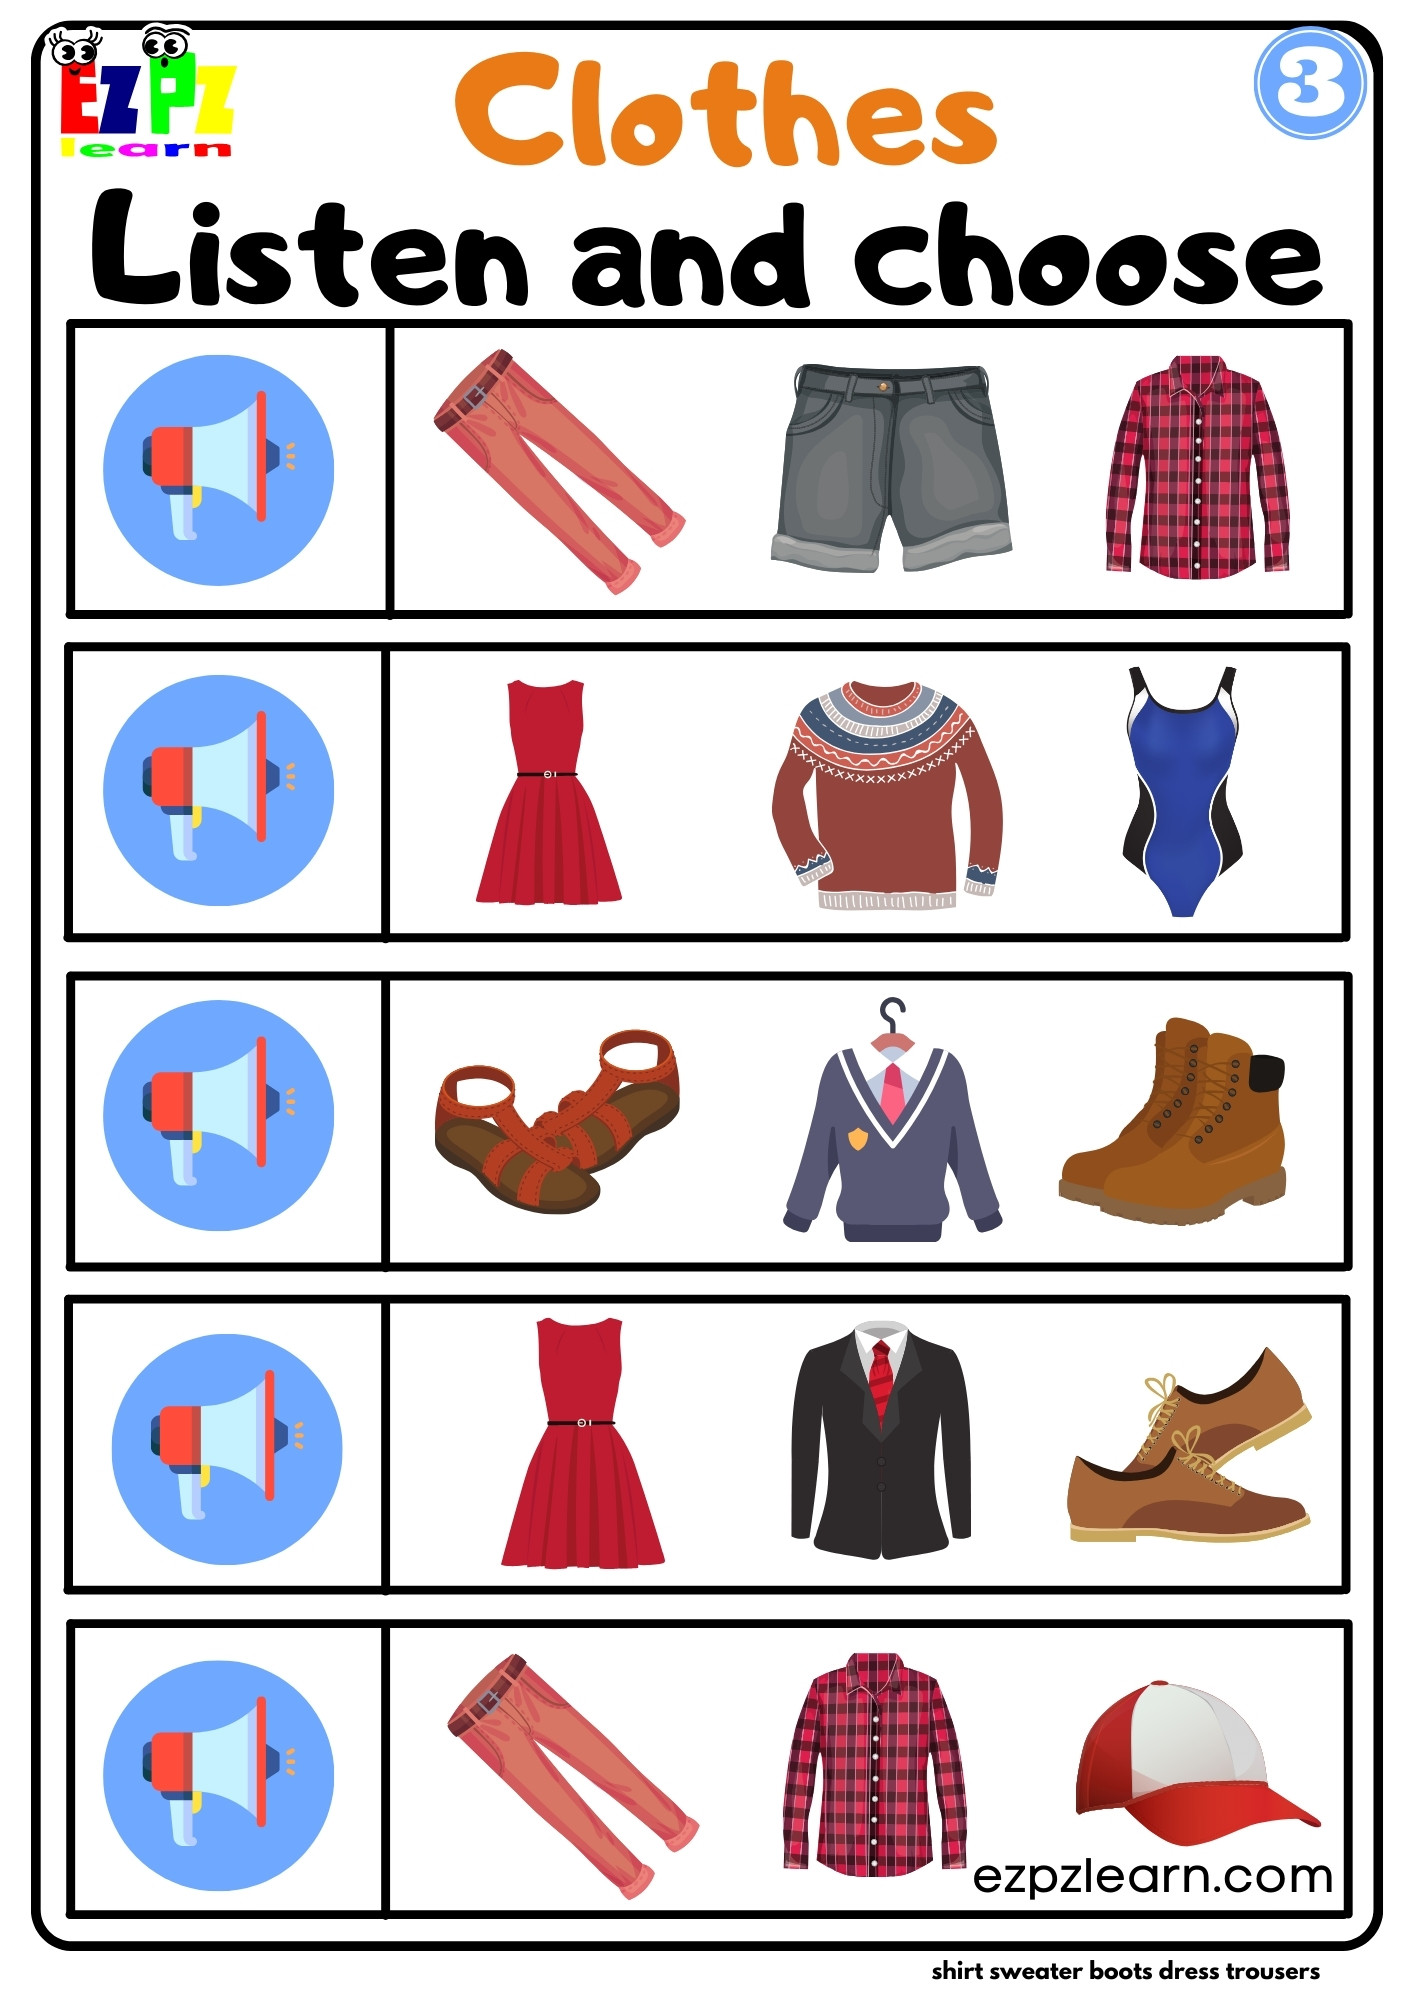 Interactive Clothes Worksheet Listen and Choose the Correct Images